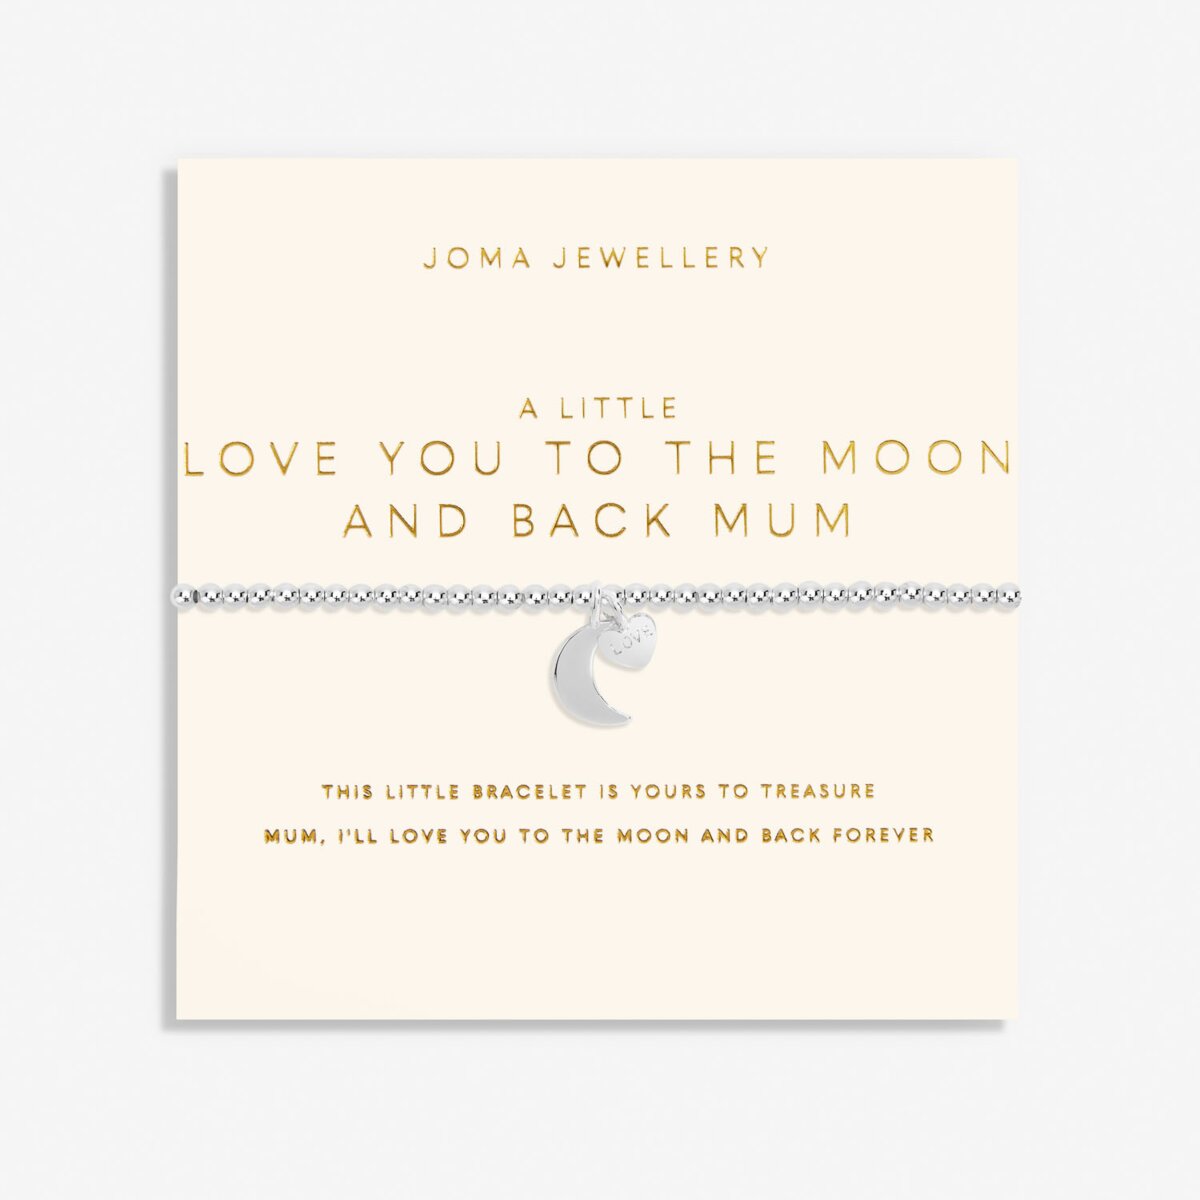 JOMA JEWELLERY | MOTHER'S DAY A LITTLE | LOVE YOU TOO THE MOON AND BACK MUM BRACELET